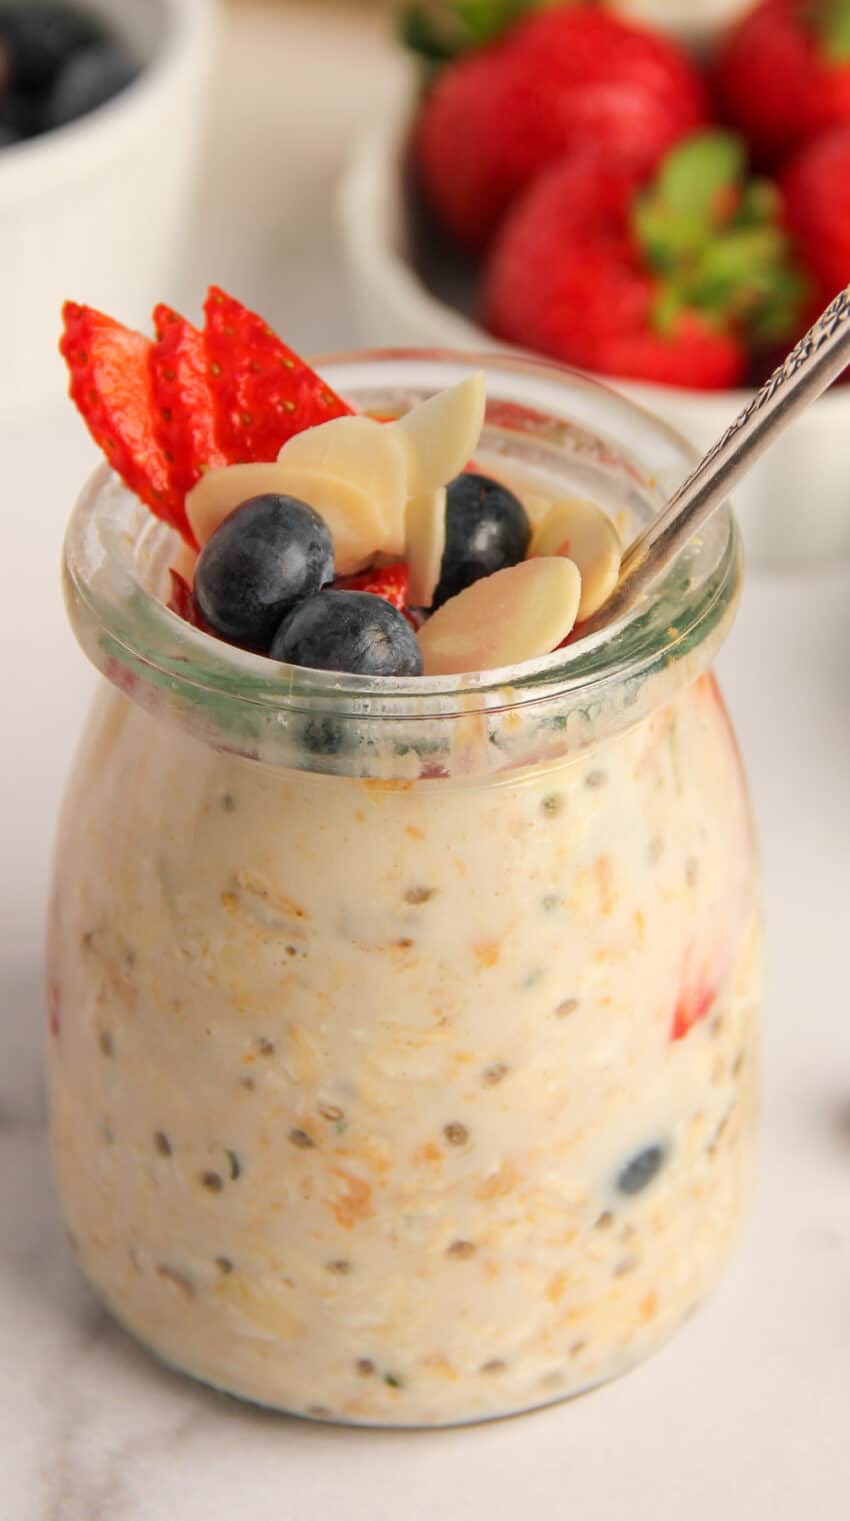 a jar of overnight oats with chia seeds, topped with berries and almonds